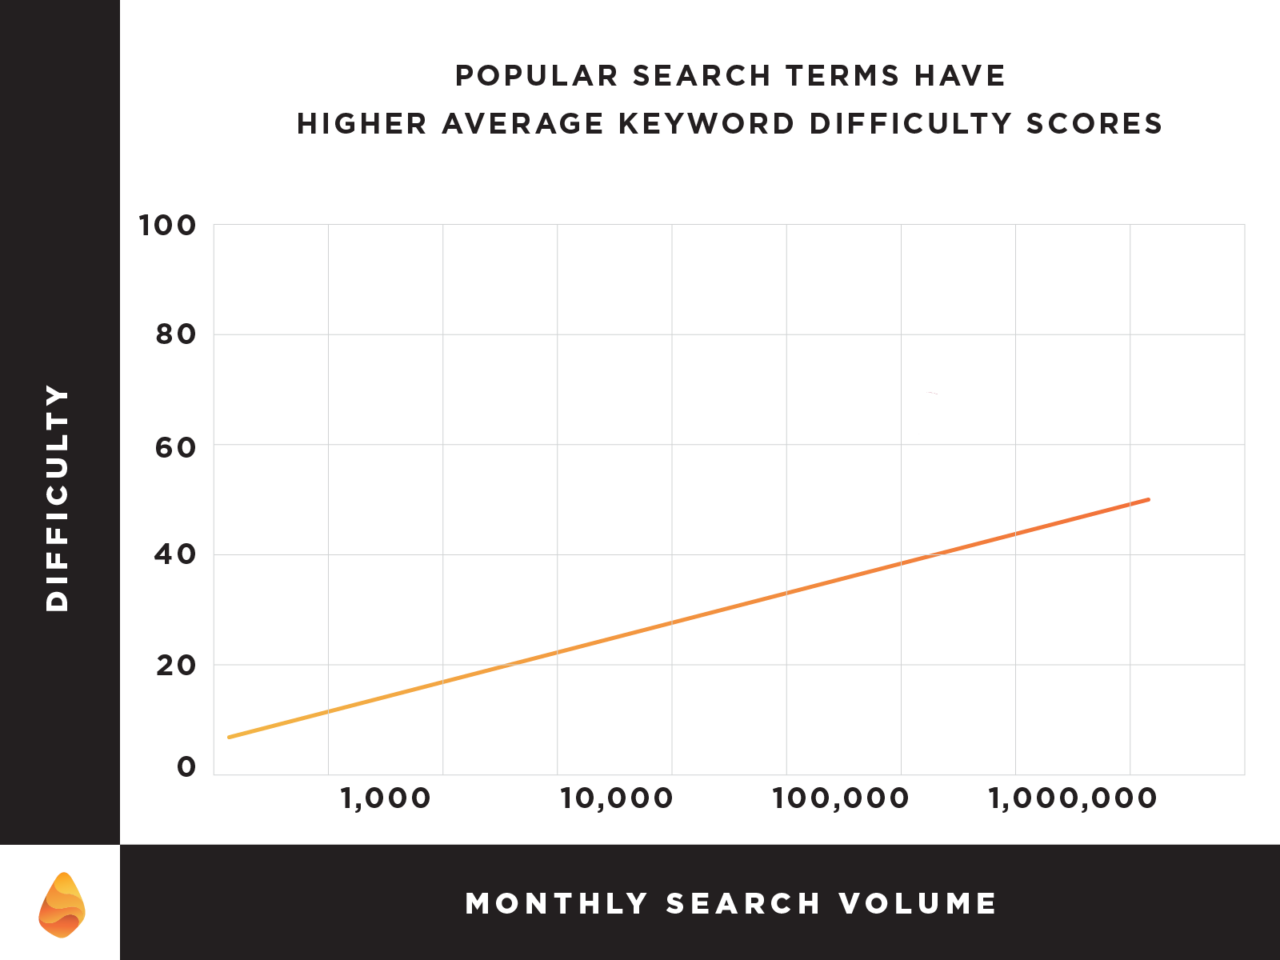 Graph showing that popular search terms have higher KD terms